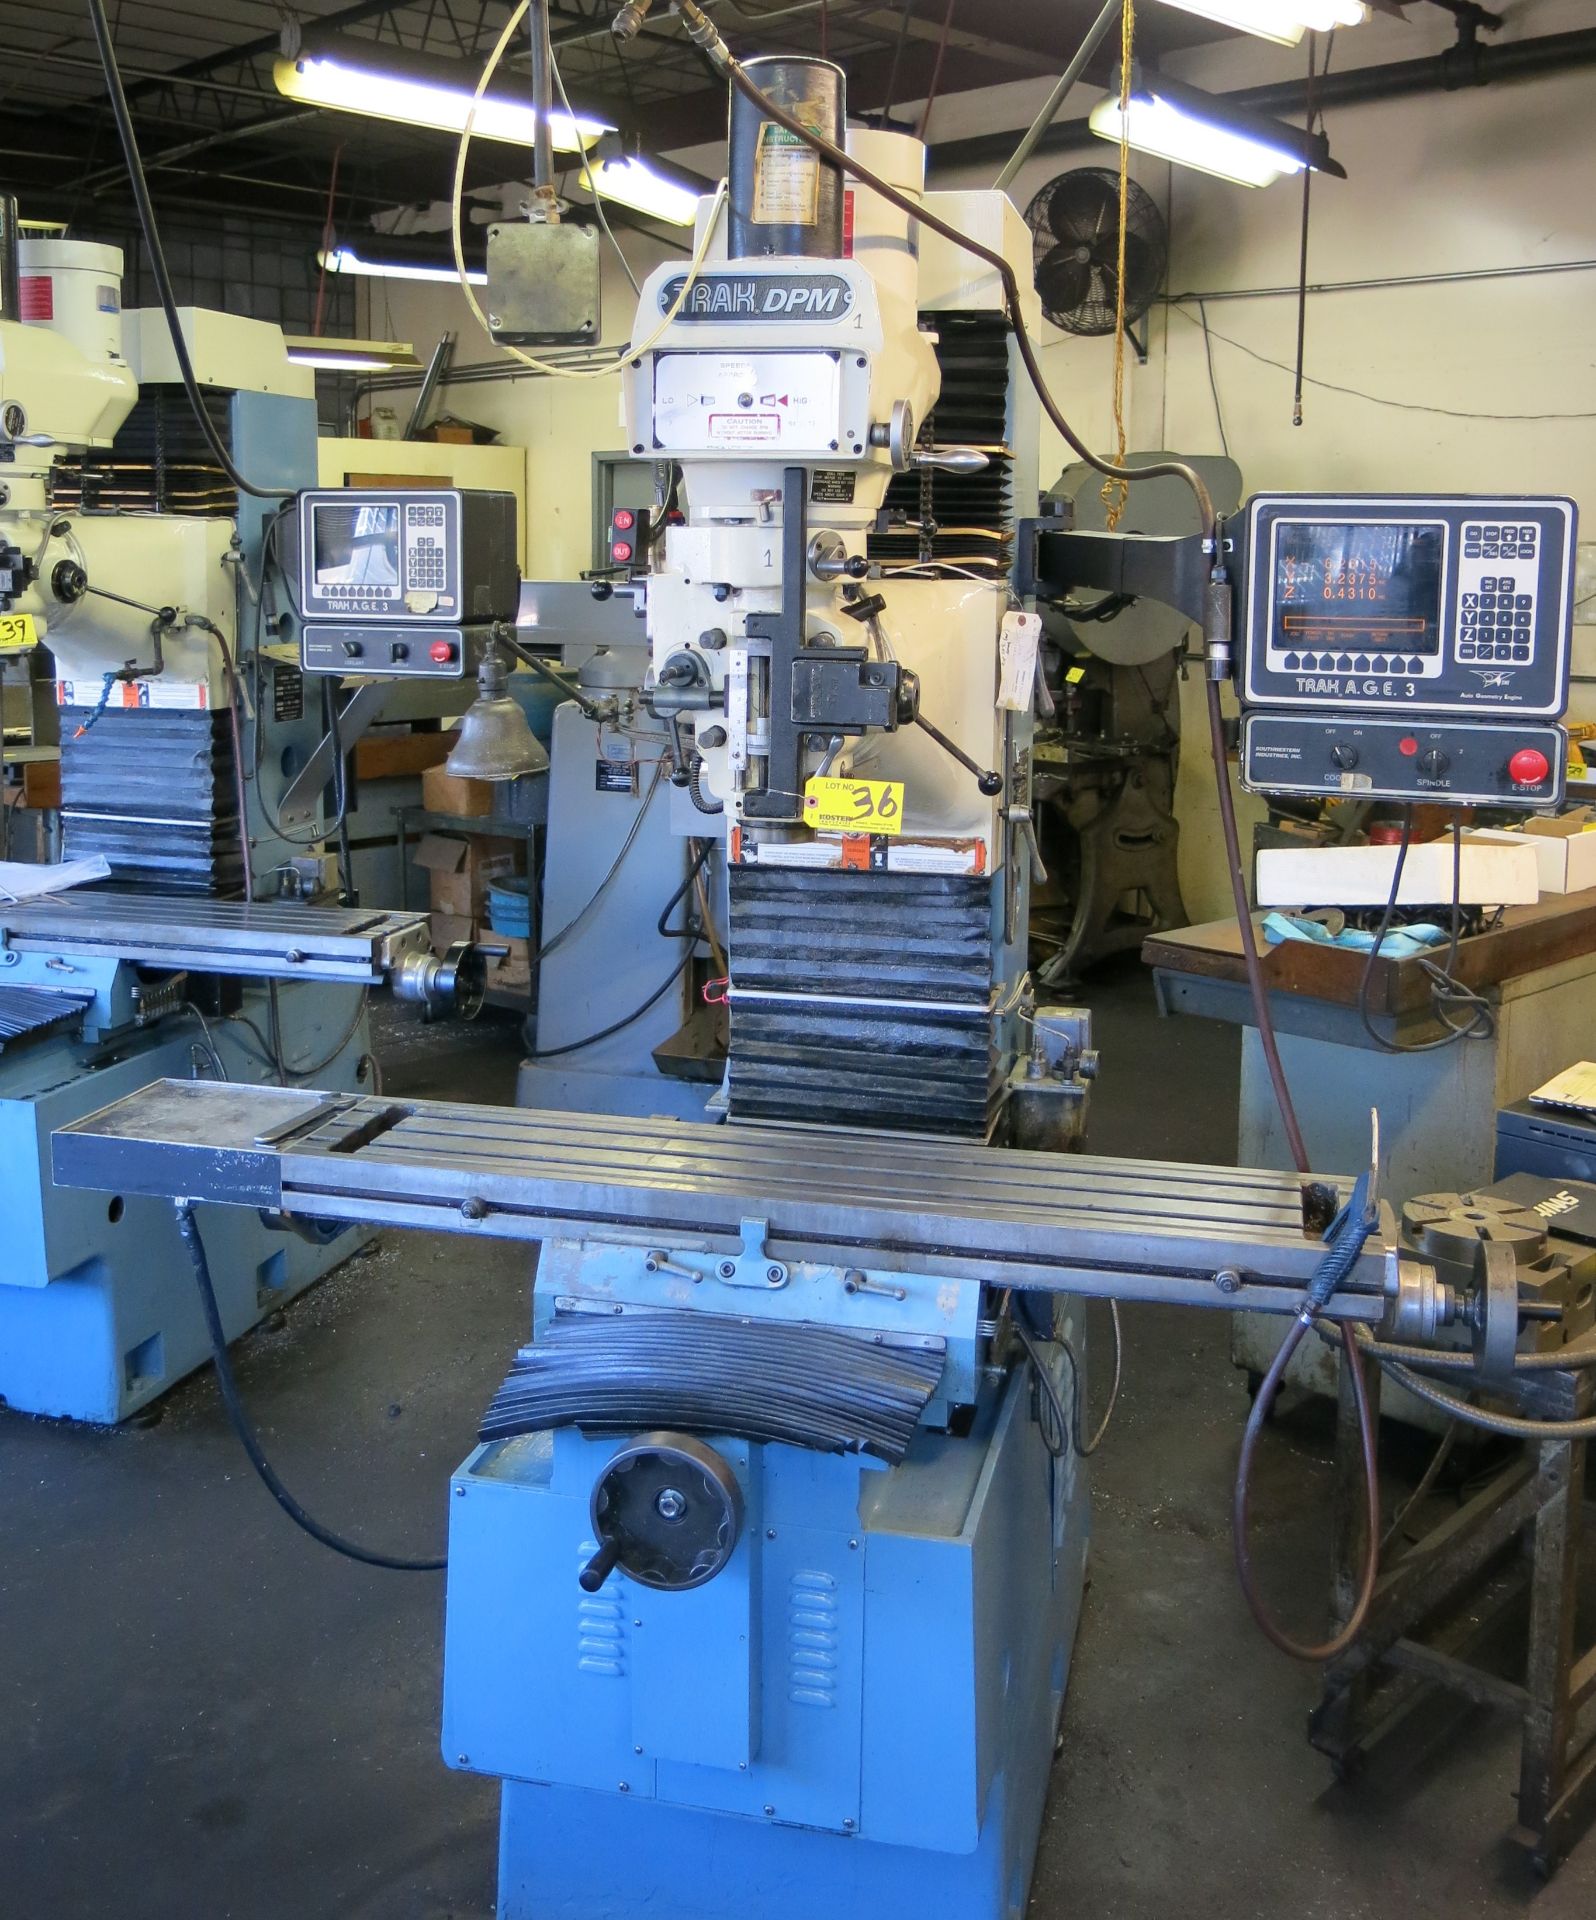 (1) TRAK CNC 3-AXIS VERTICAL MILLING MACHINE WITH APPROXIMATELY 50" T-SLOT TABLE, KURT POWER LOCK